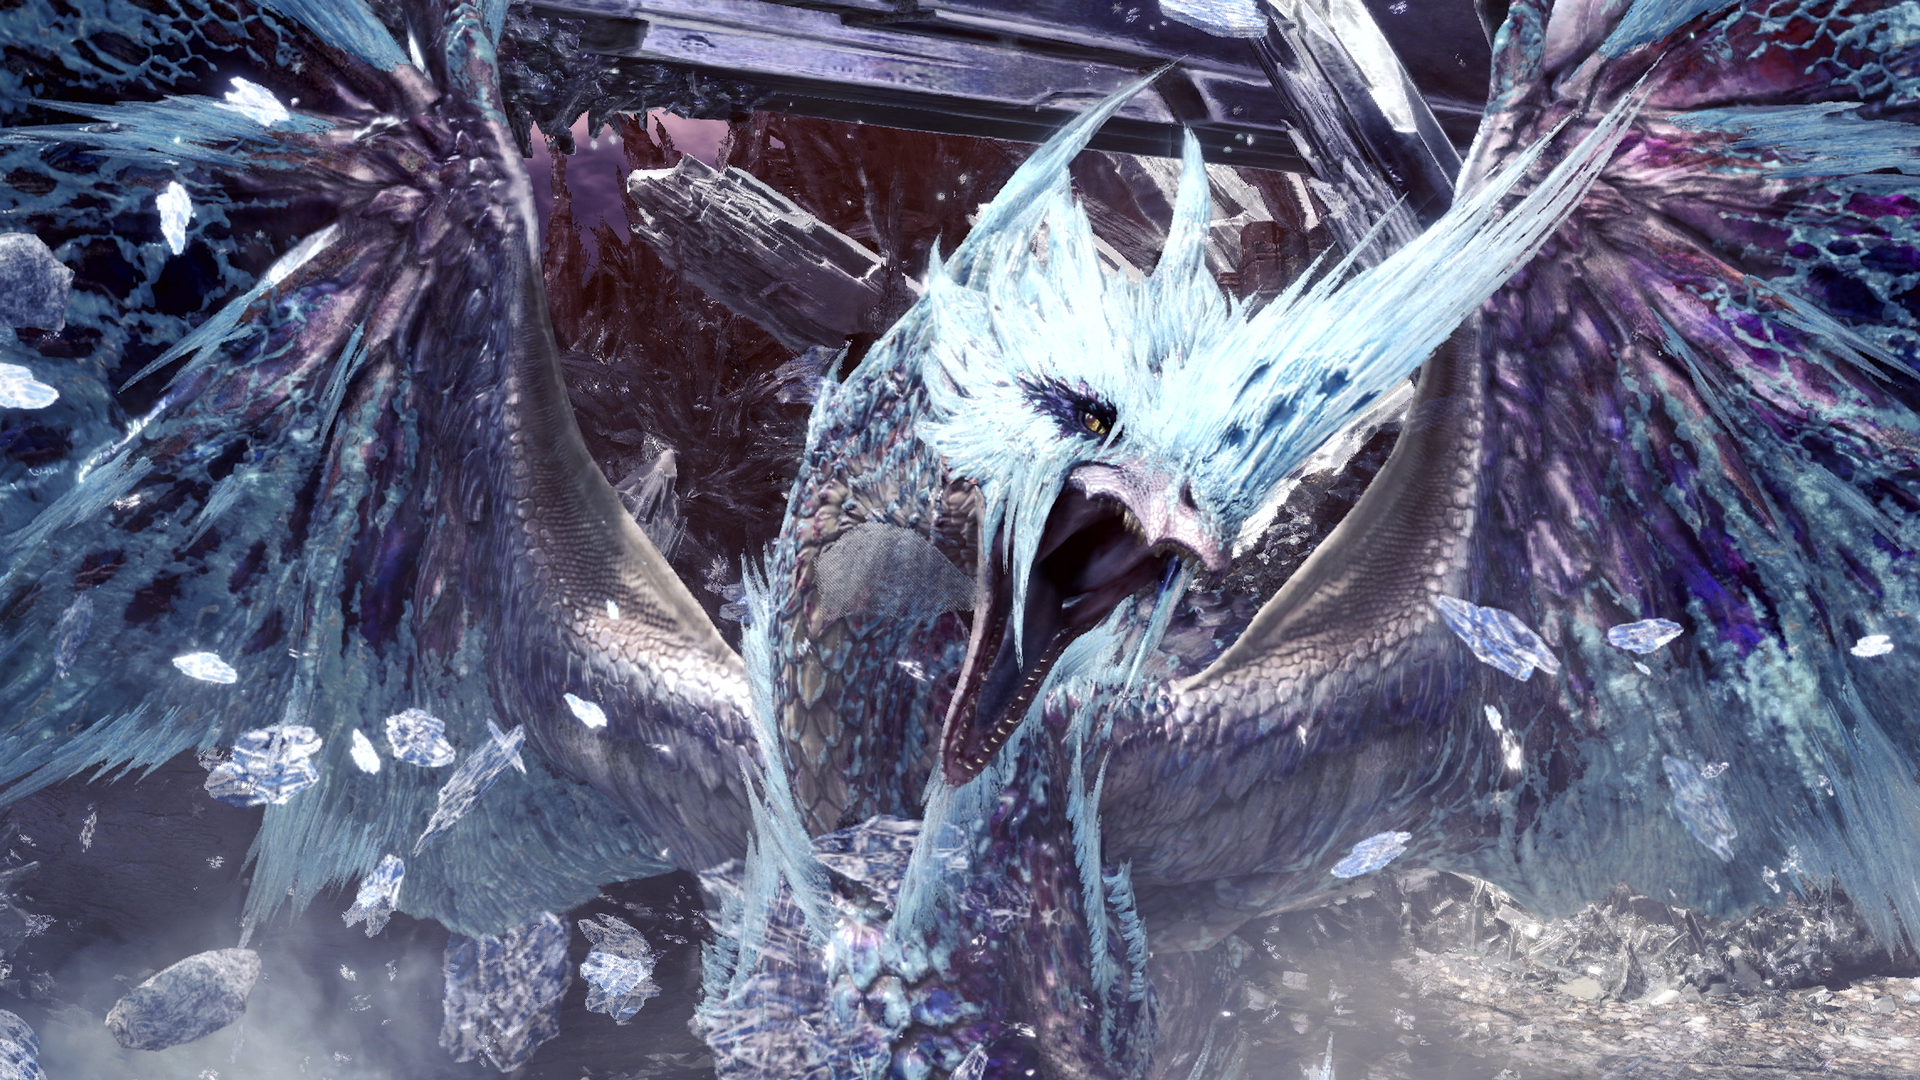 Monster Hunter World: Iceborne Gets The Fifth Free Update